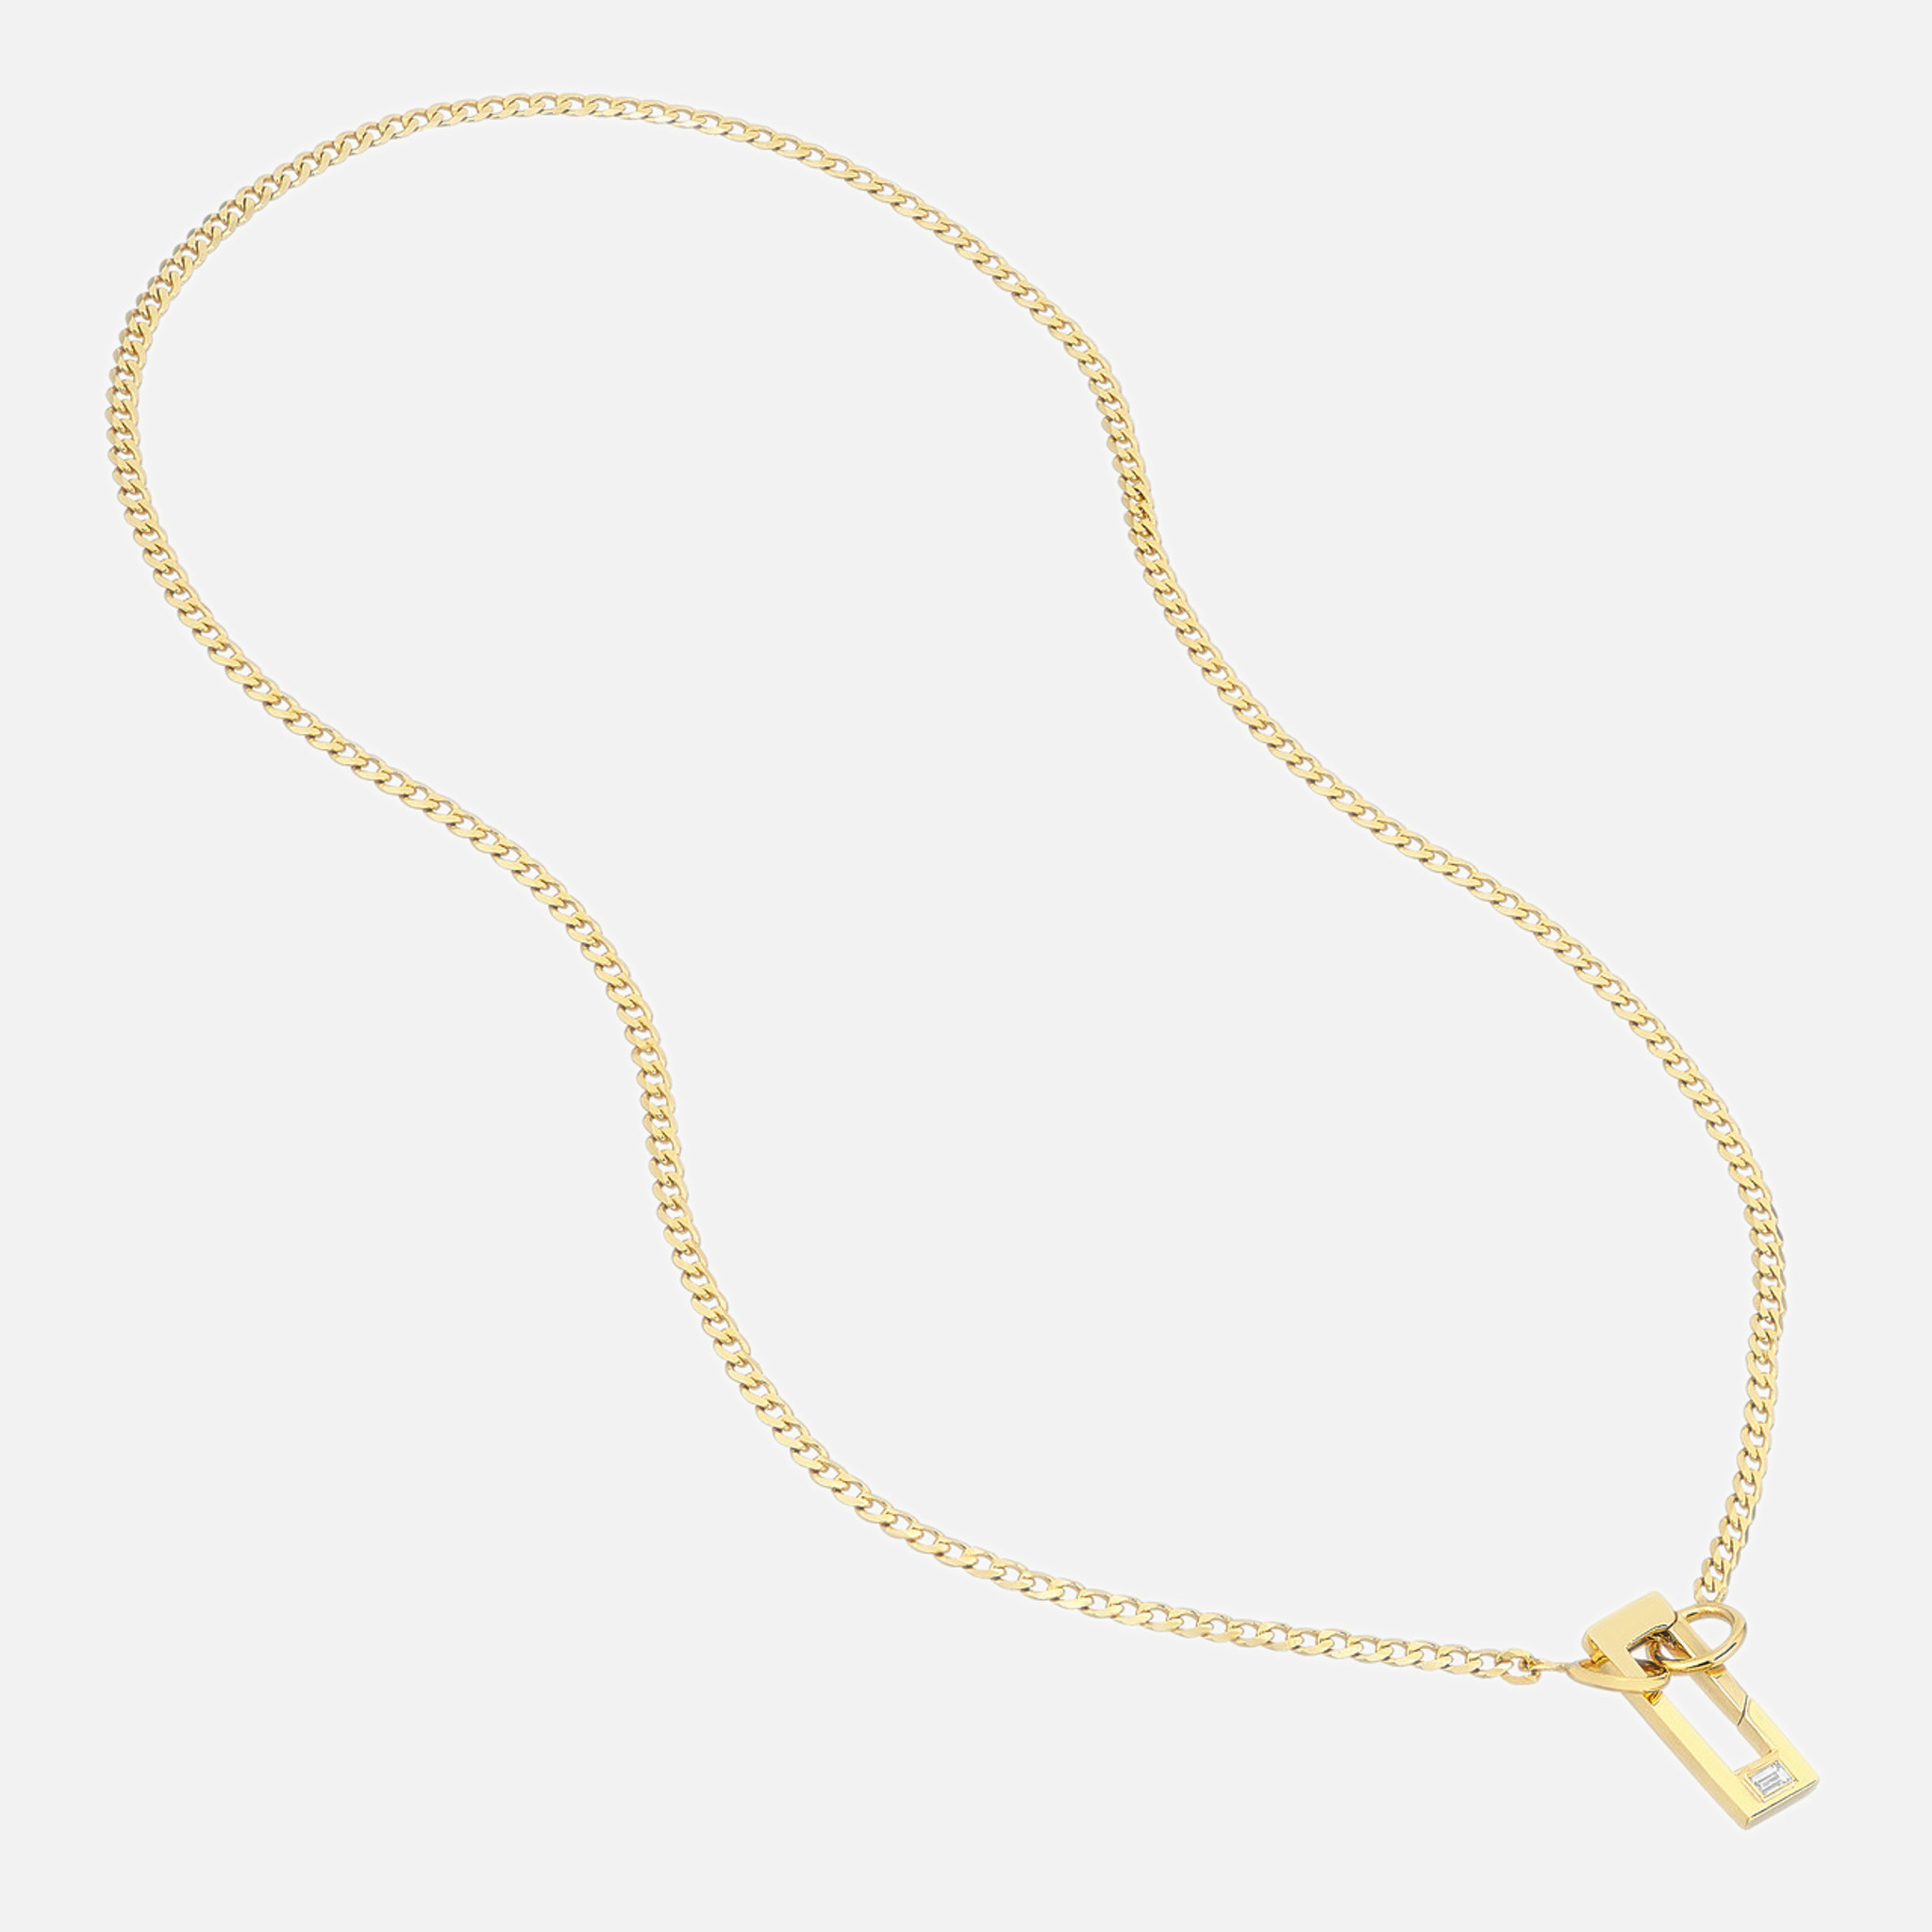 Shiny 14k yellow gold curb chain necklace.